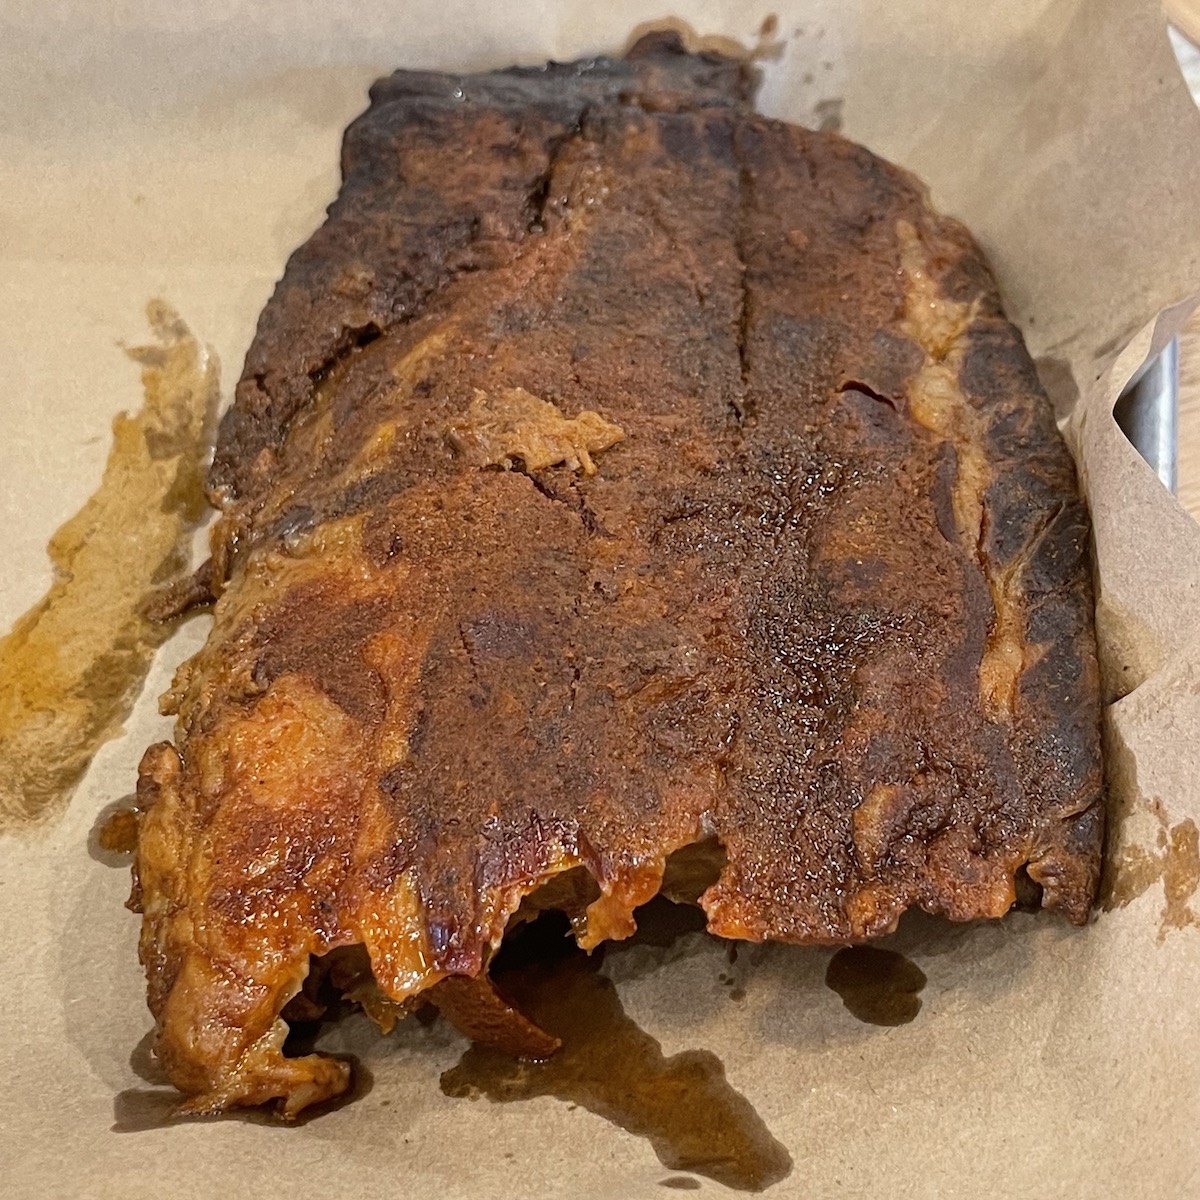 Baby Back Ribs from Mission BBQ in Doral, Florida